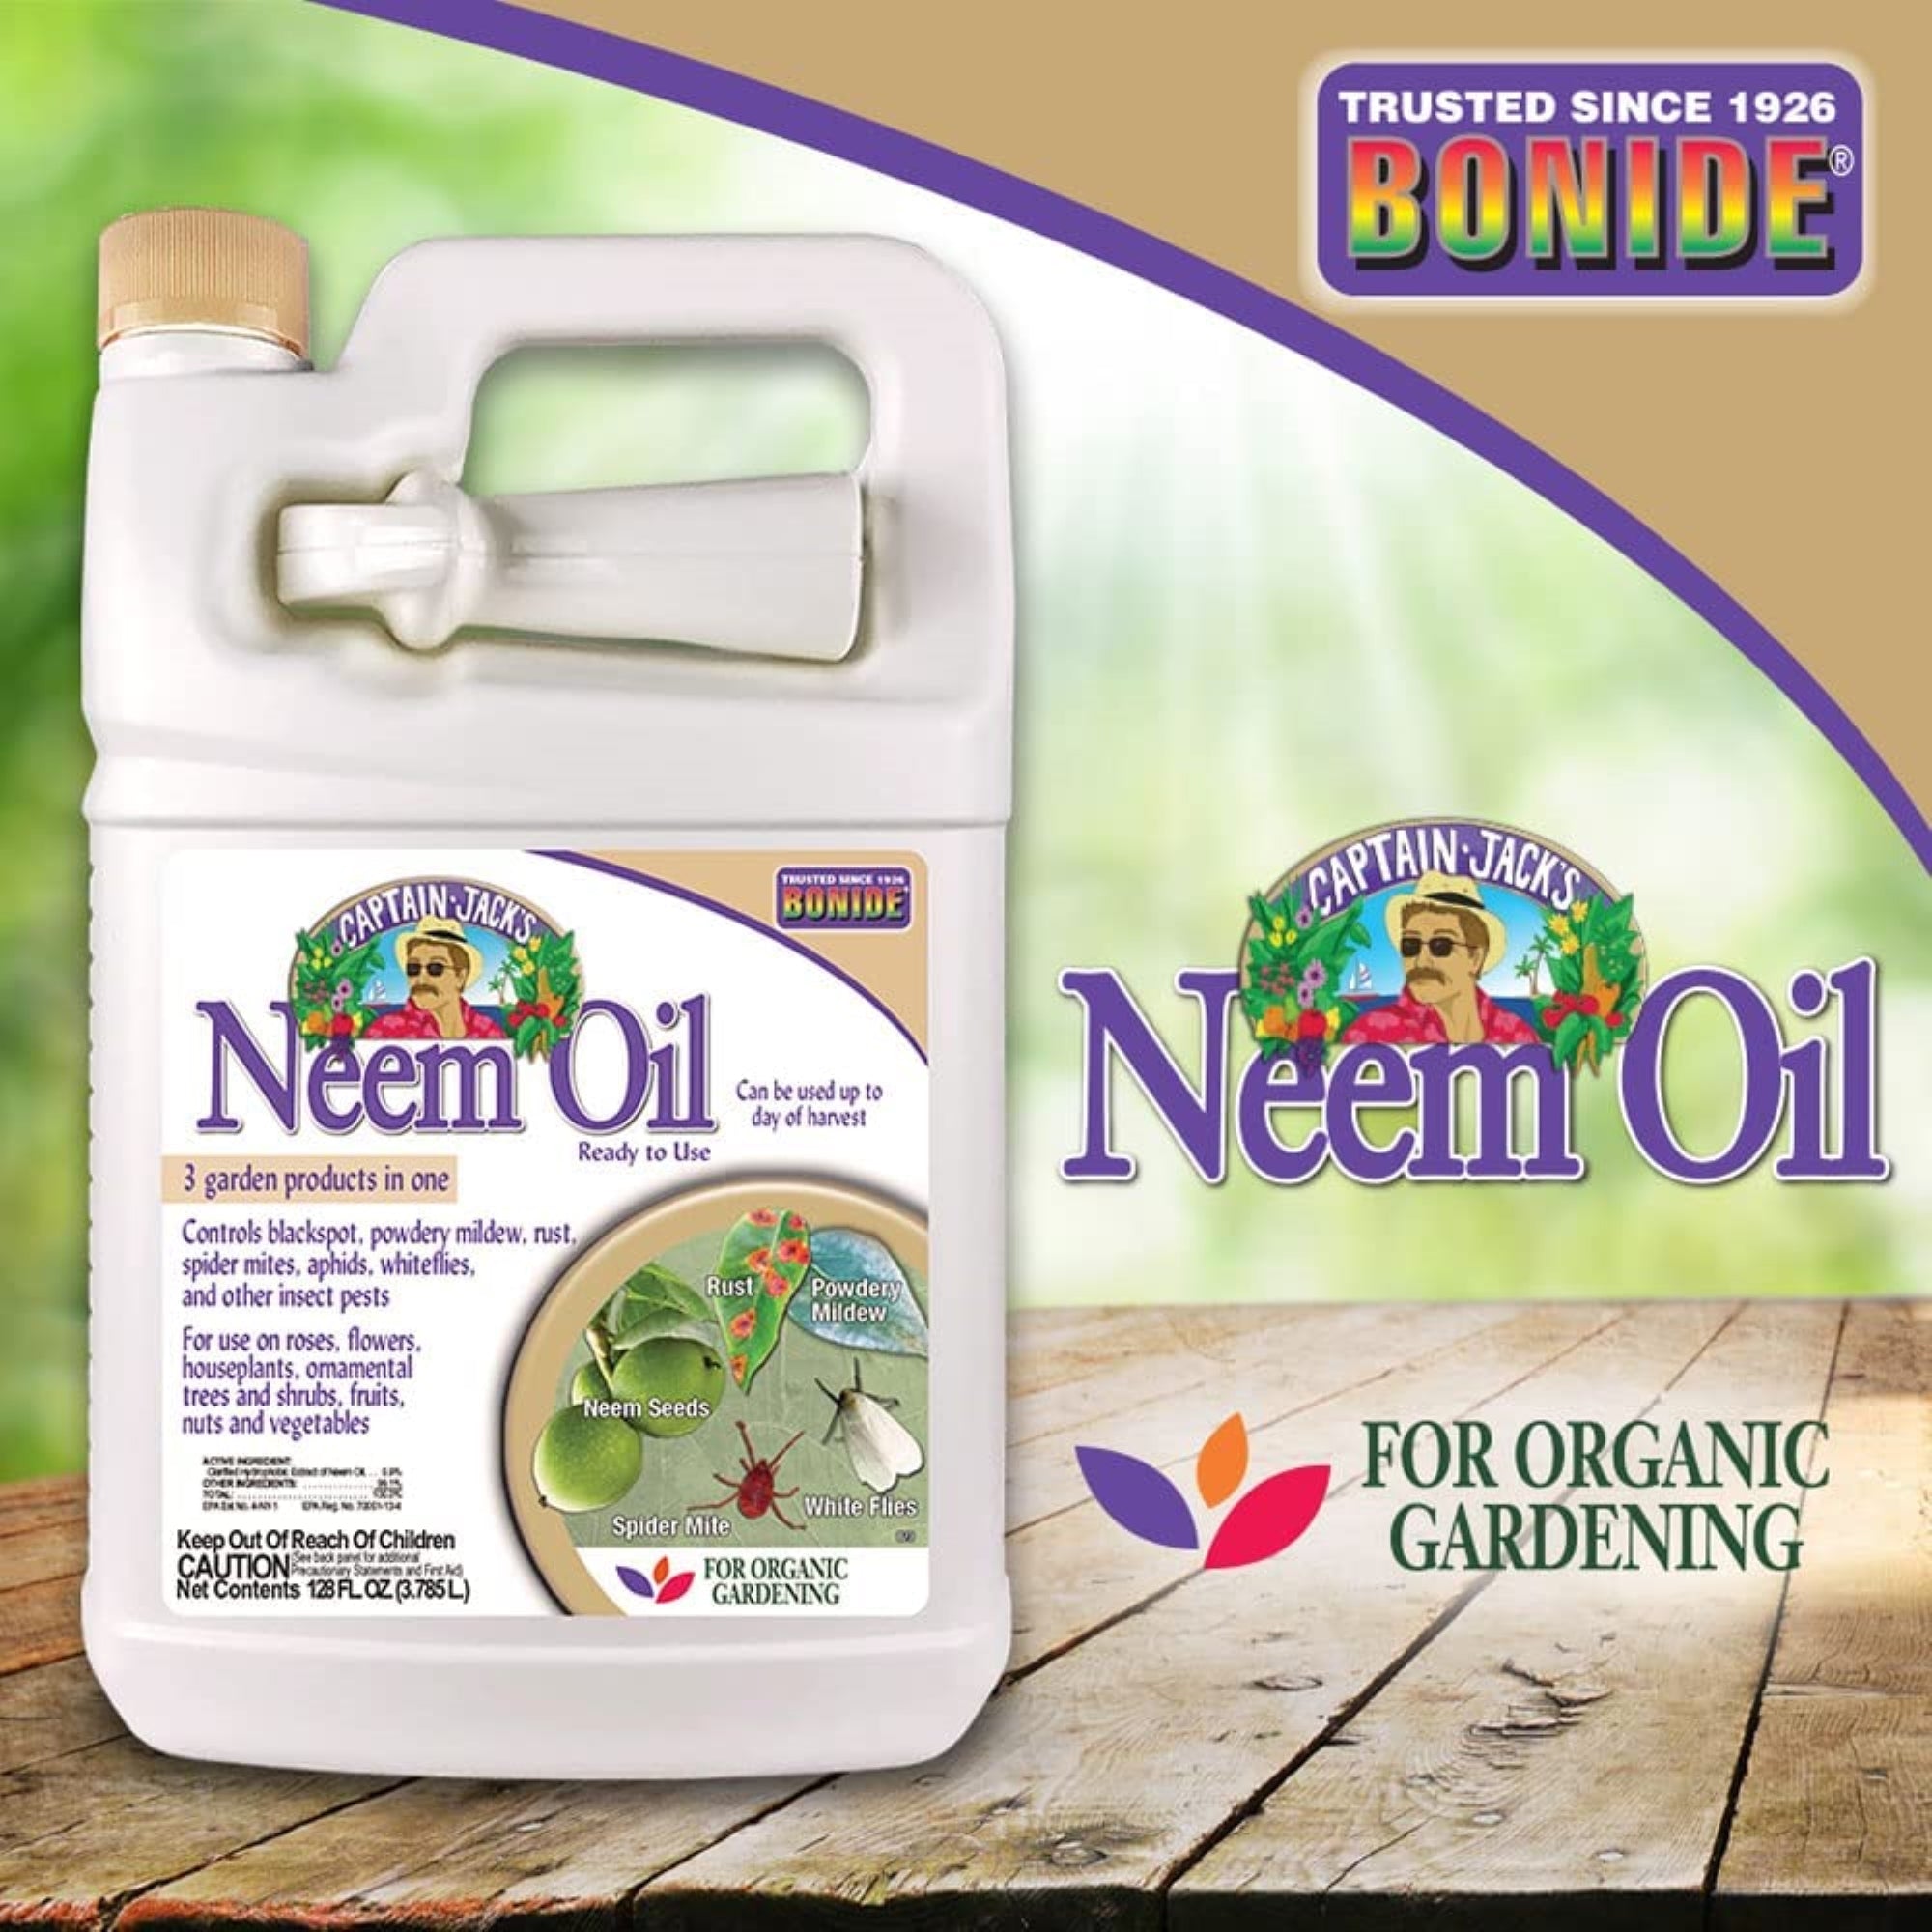 Bonide Neem Oil Ready To Use Insecticide, White, 128 Fluid Ounces